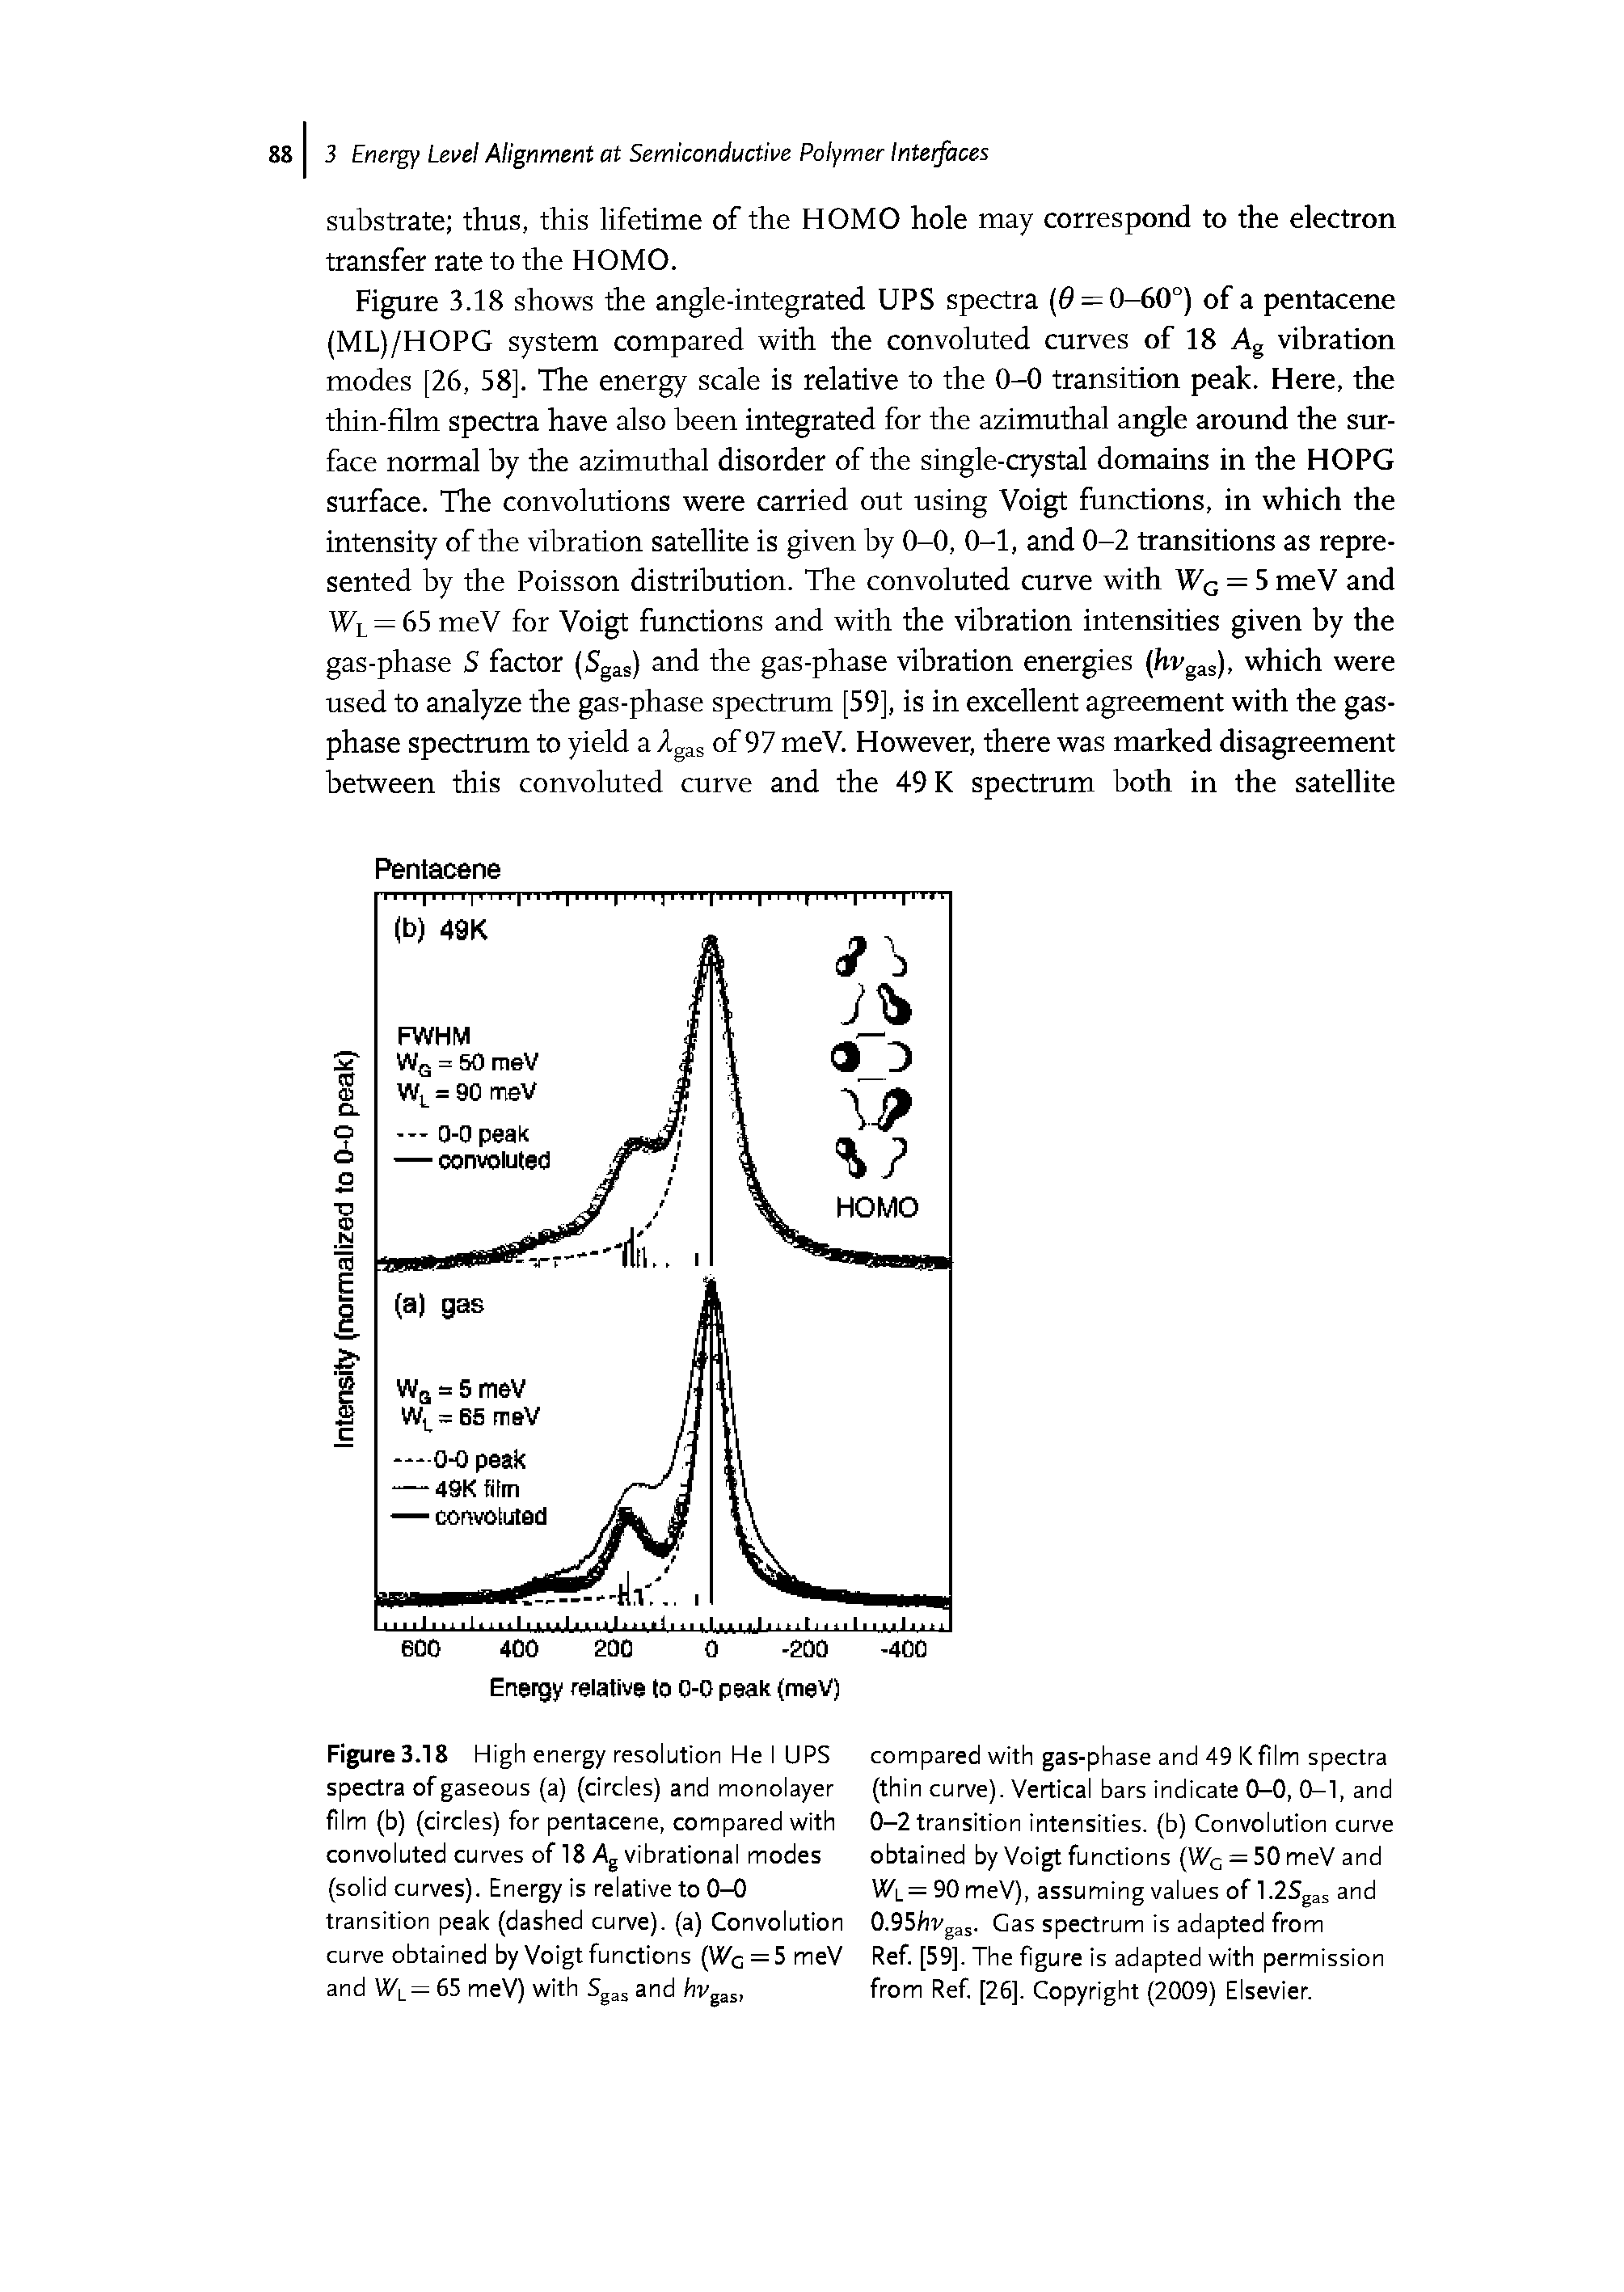 Figure 3.18 High energy resolution He I UPS spectra of gaseous (a) (circles) and monolayer film (b) (circles) for pentacene, compared with convoluted curves of 18 Ag vibrational modes (solid curves). Energy is relative to 0-0 transition peak (dashed curve), (a) Convolution curve obtained by Voigt functions (V/c = 5 meV and Wl= 65 meV) with Sg j and hvgas.